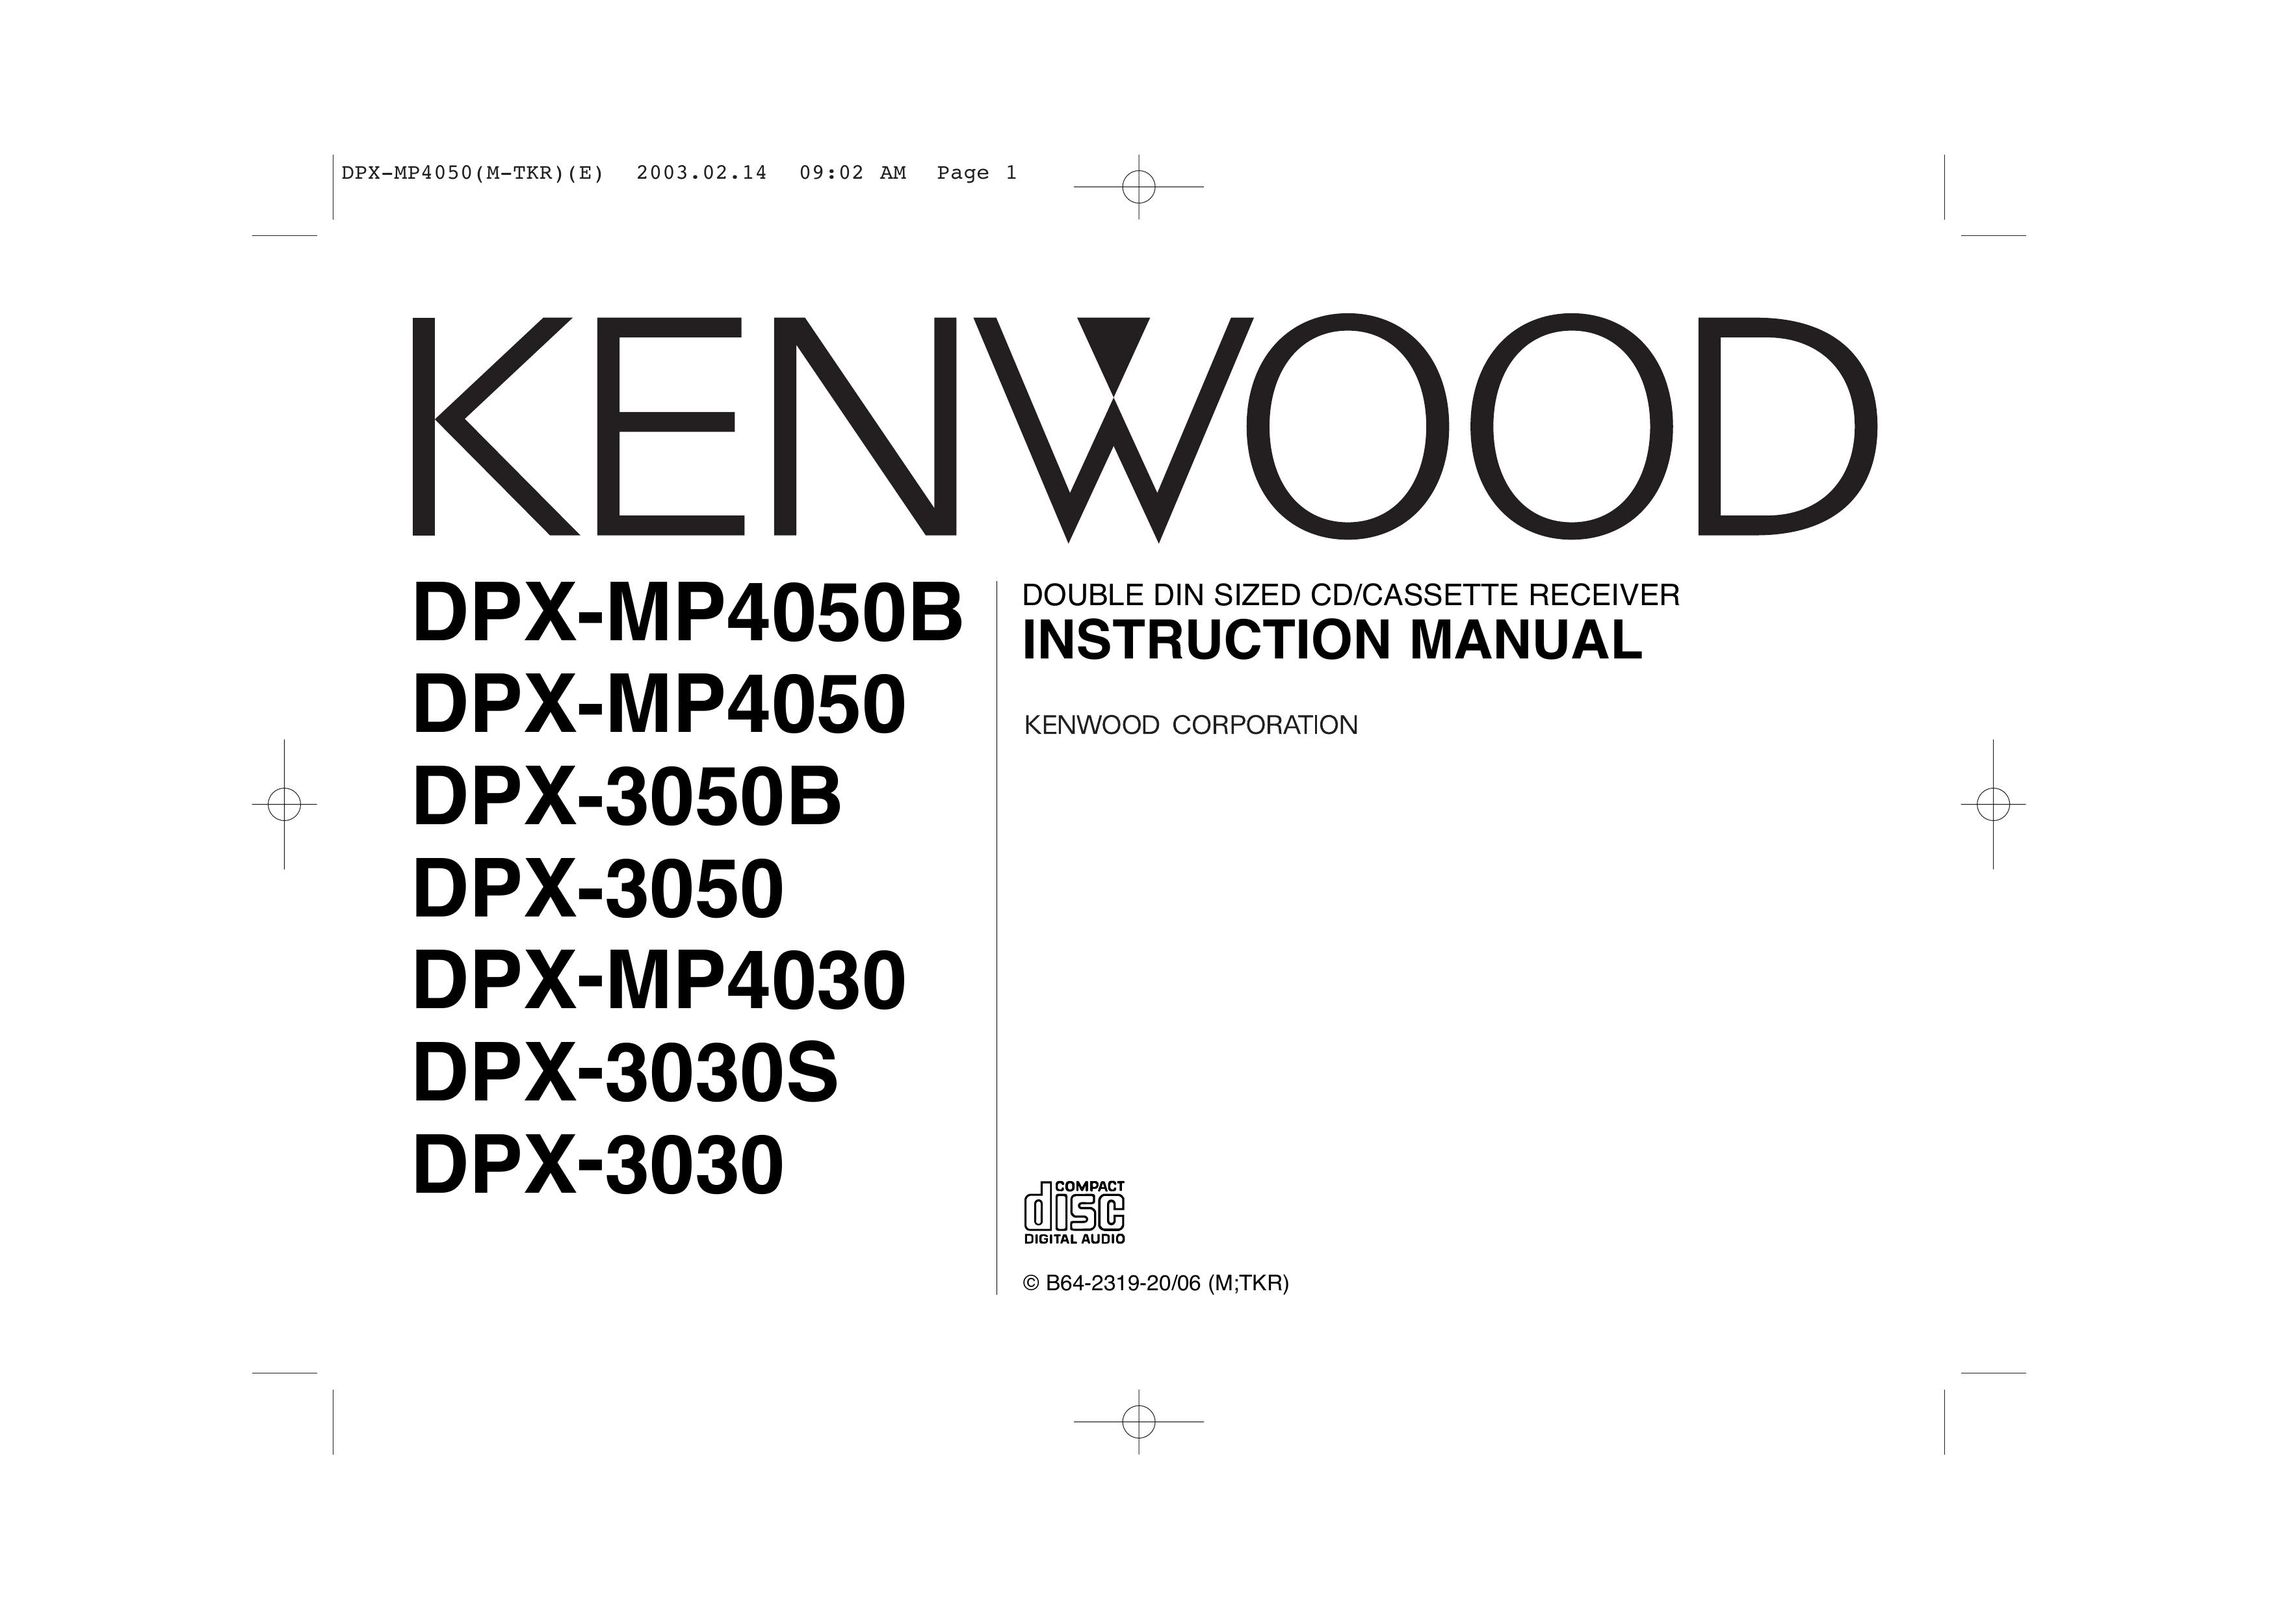 Kenwood DPX-MP4050 Car Stereo System User Manual